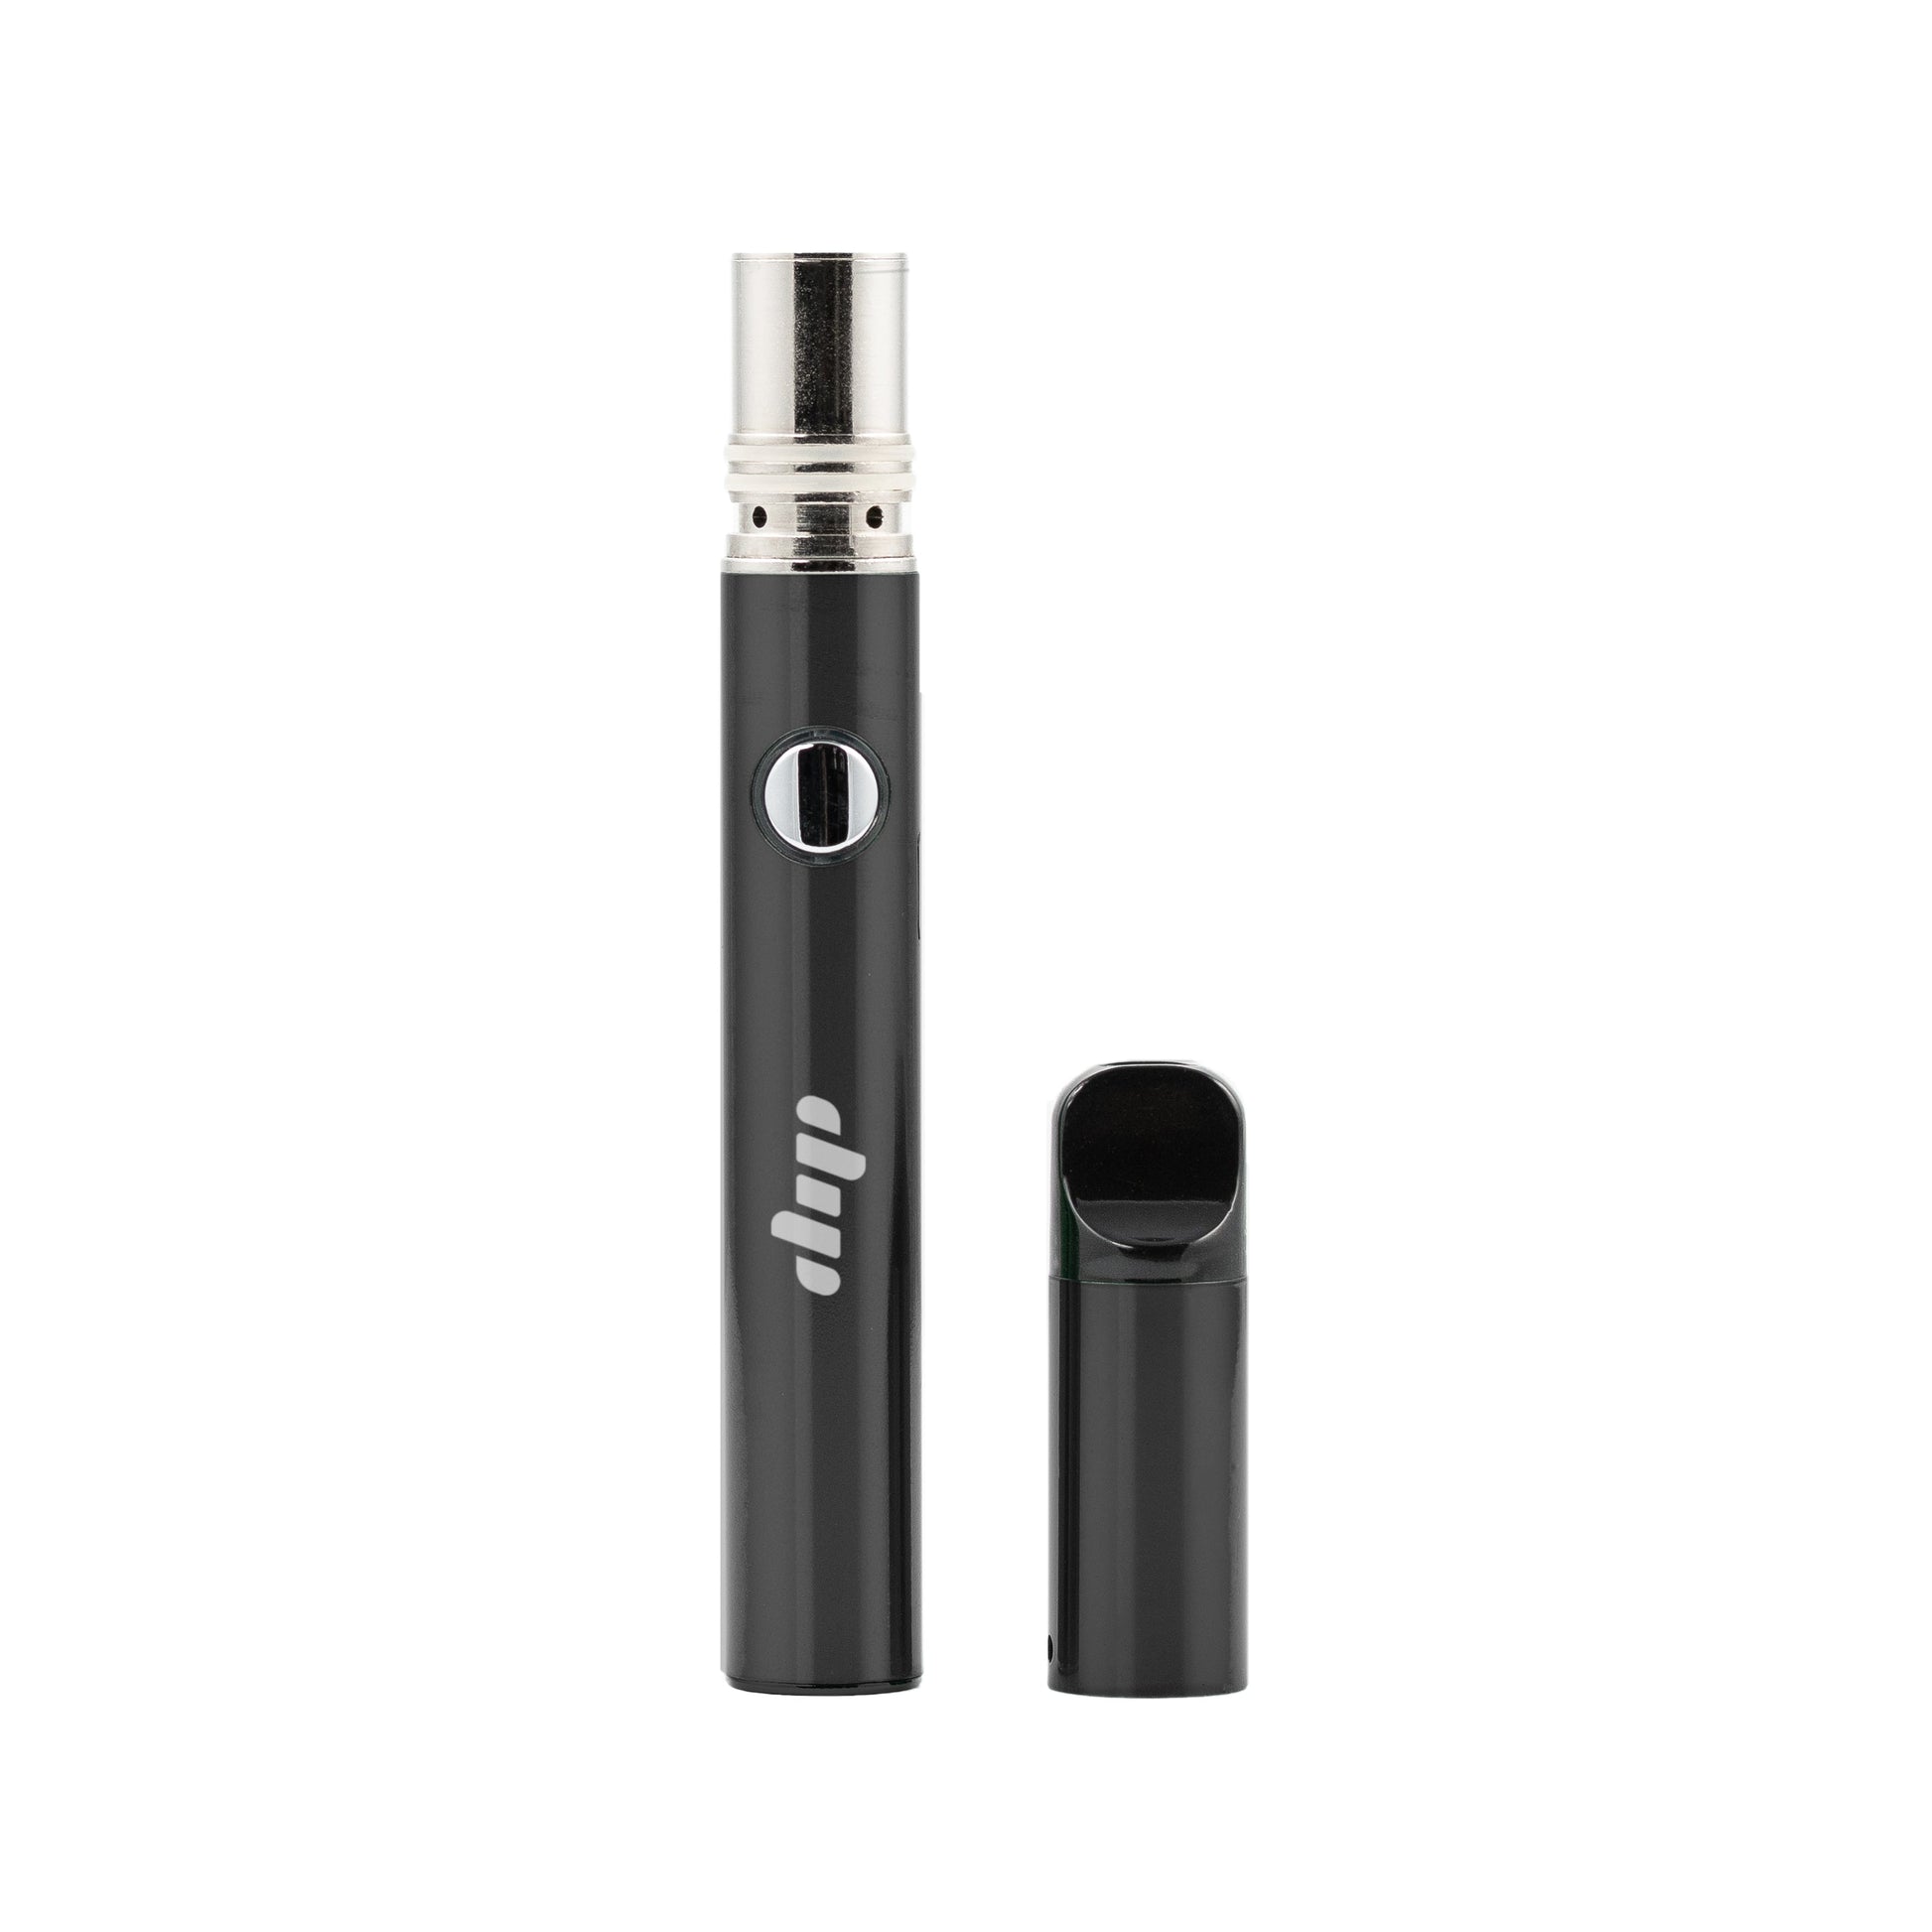 Lunar dab pen for pack-and-go vaping.